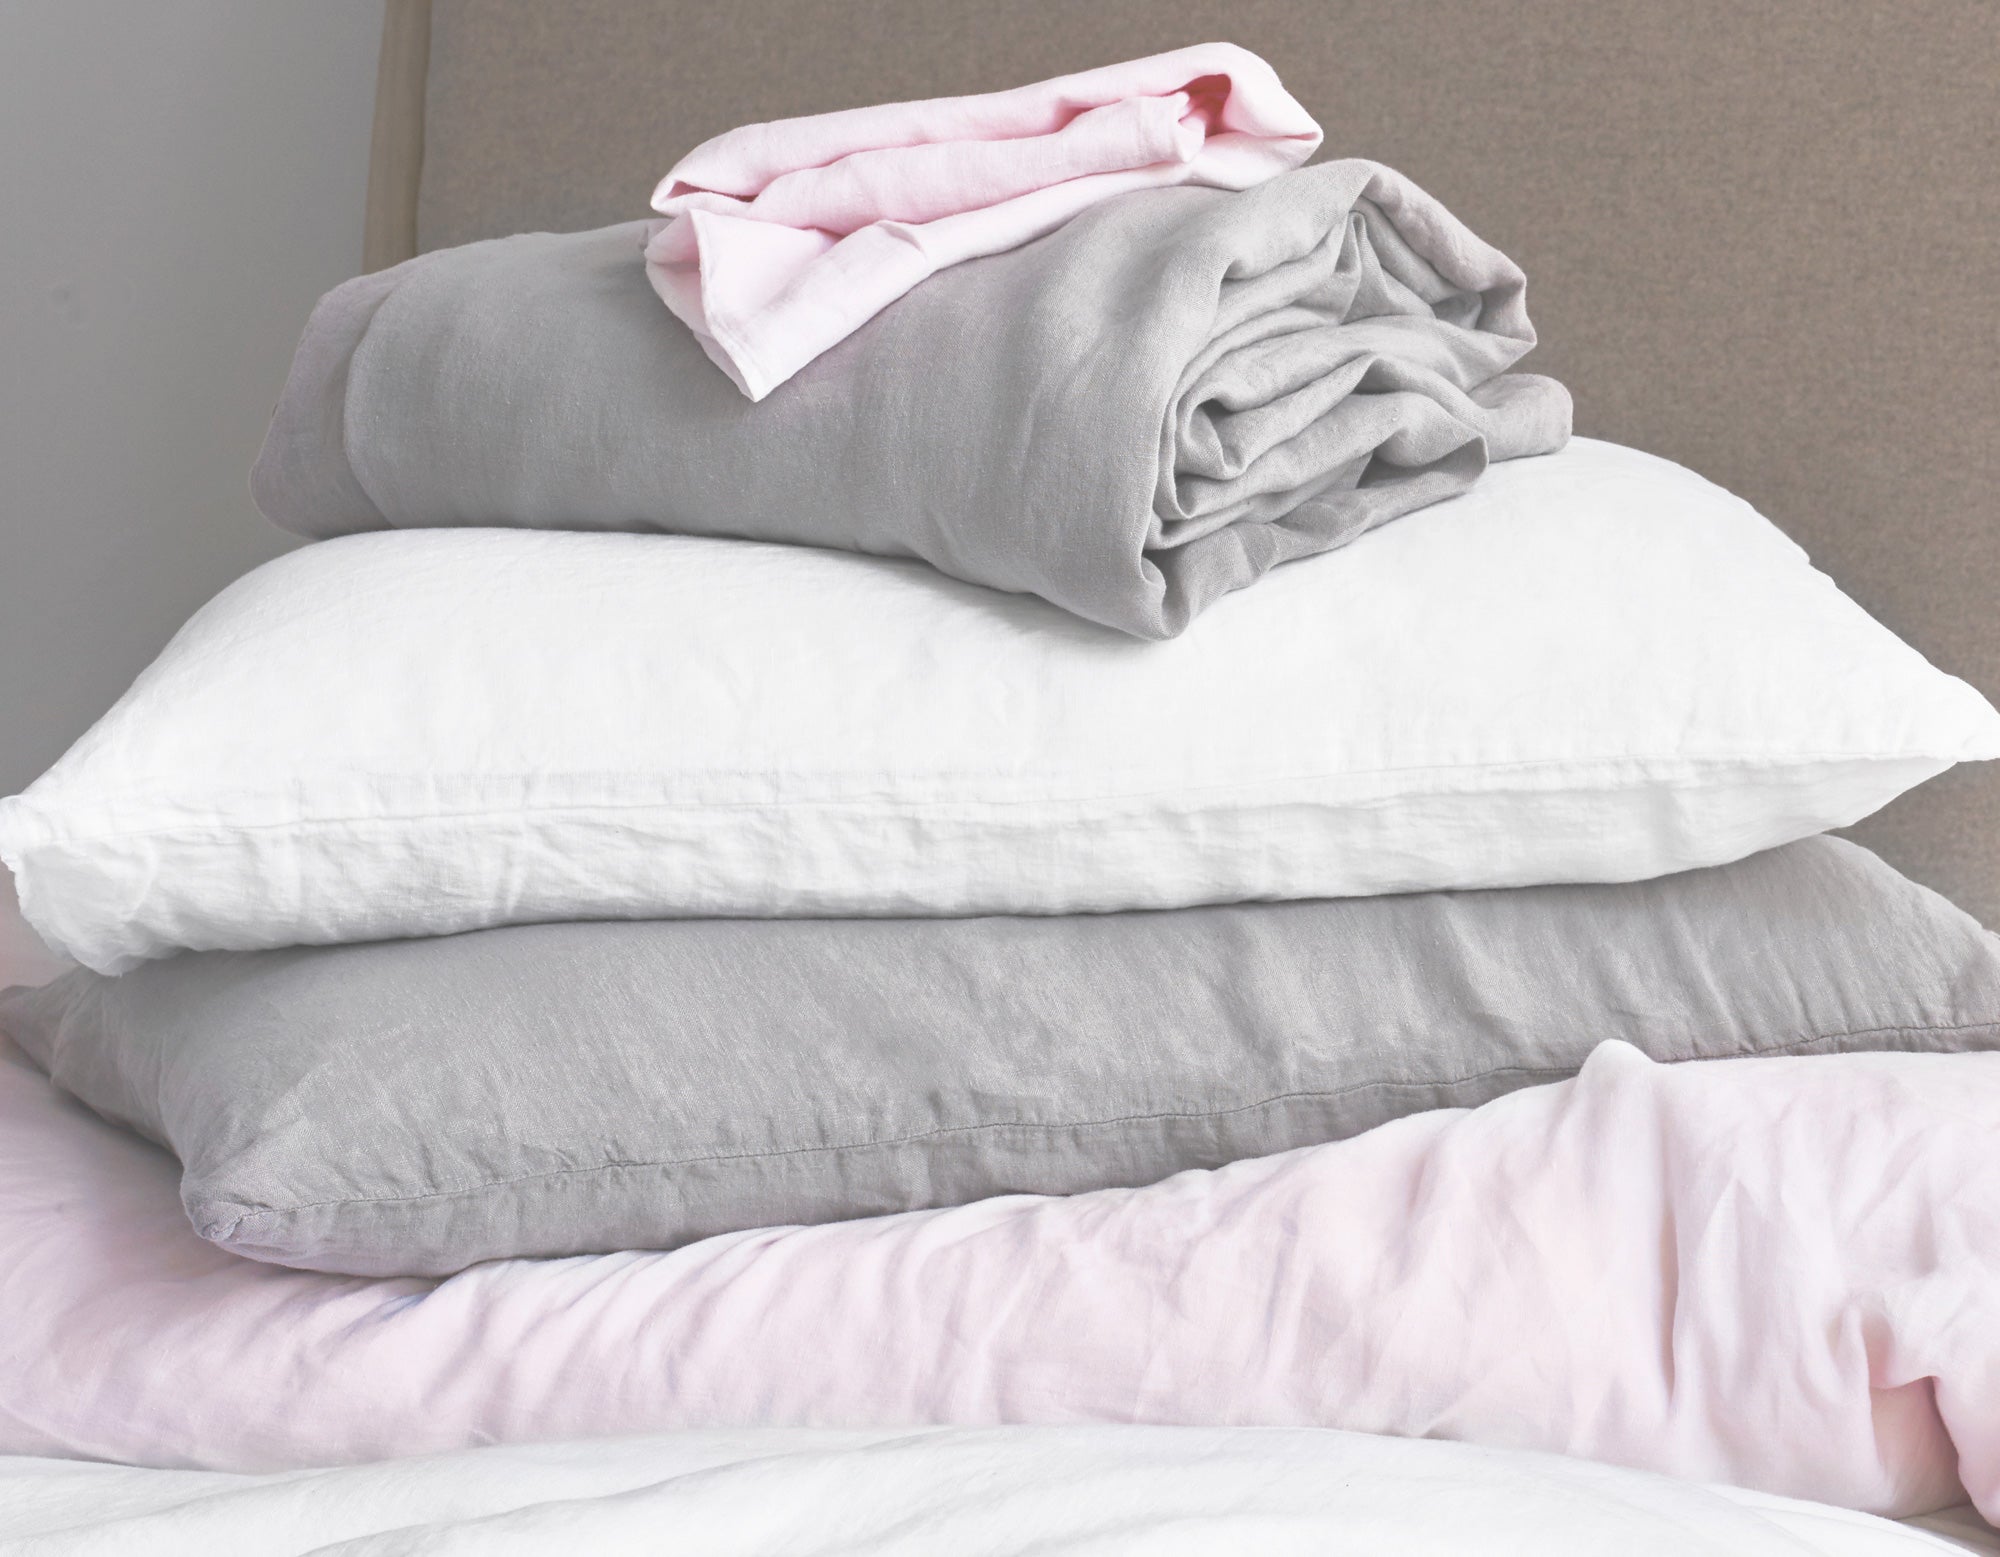 Linen Bedding in Grey, Pink and White on Bed | scooms